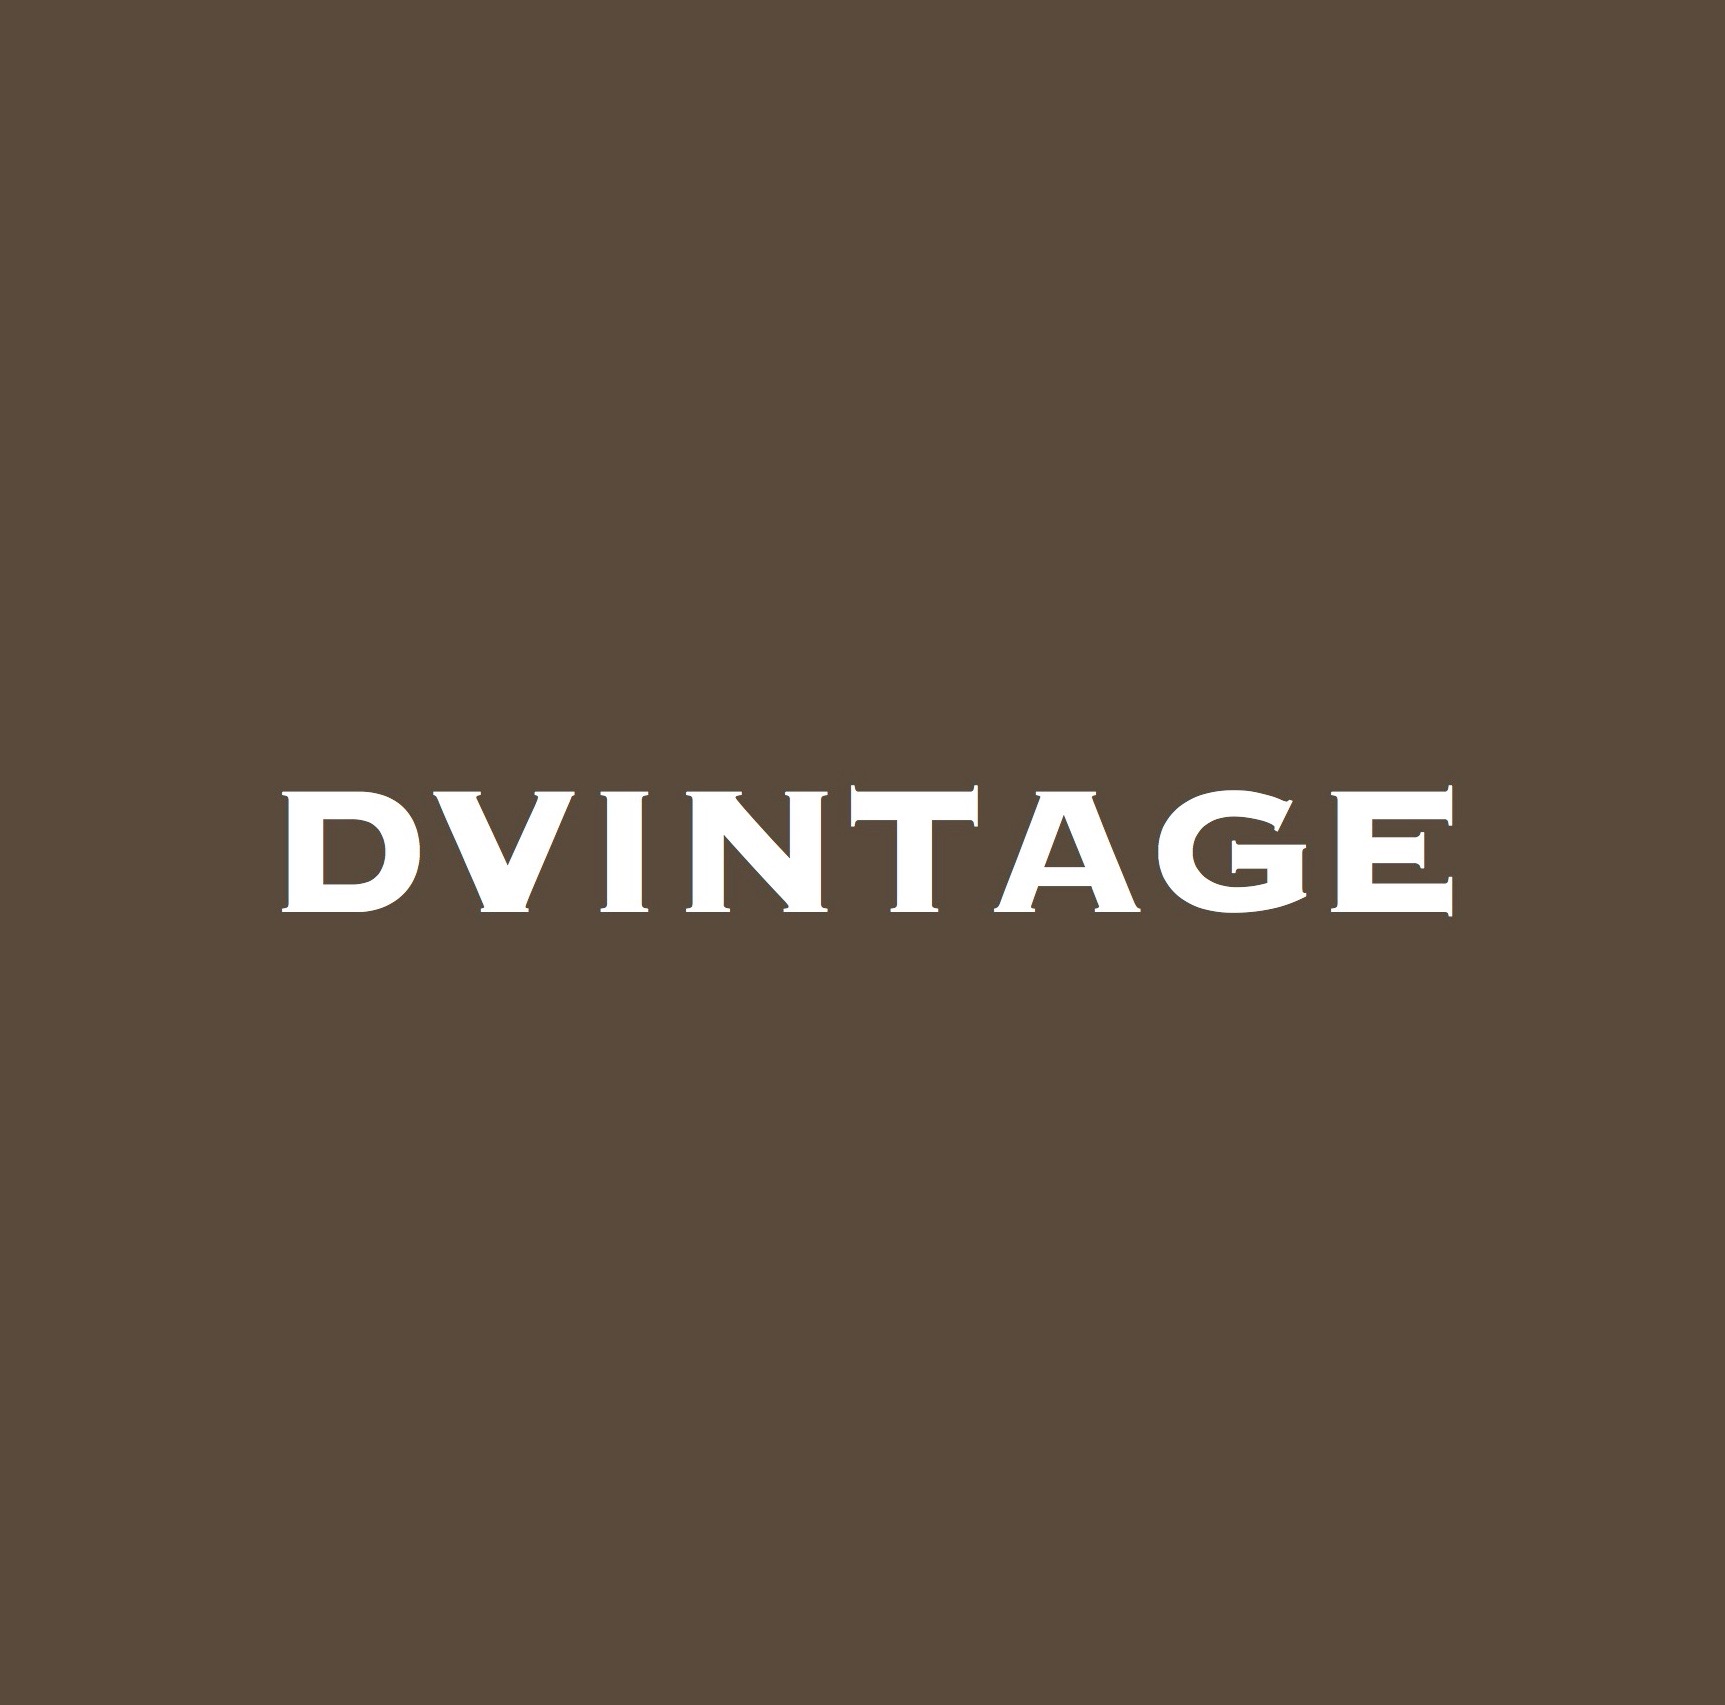 You are currently viewing DVintage Co. Ltd